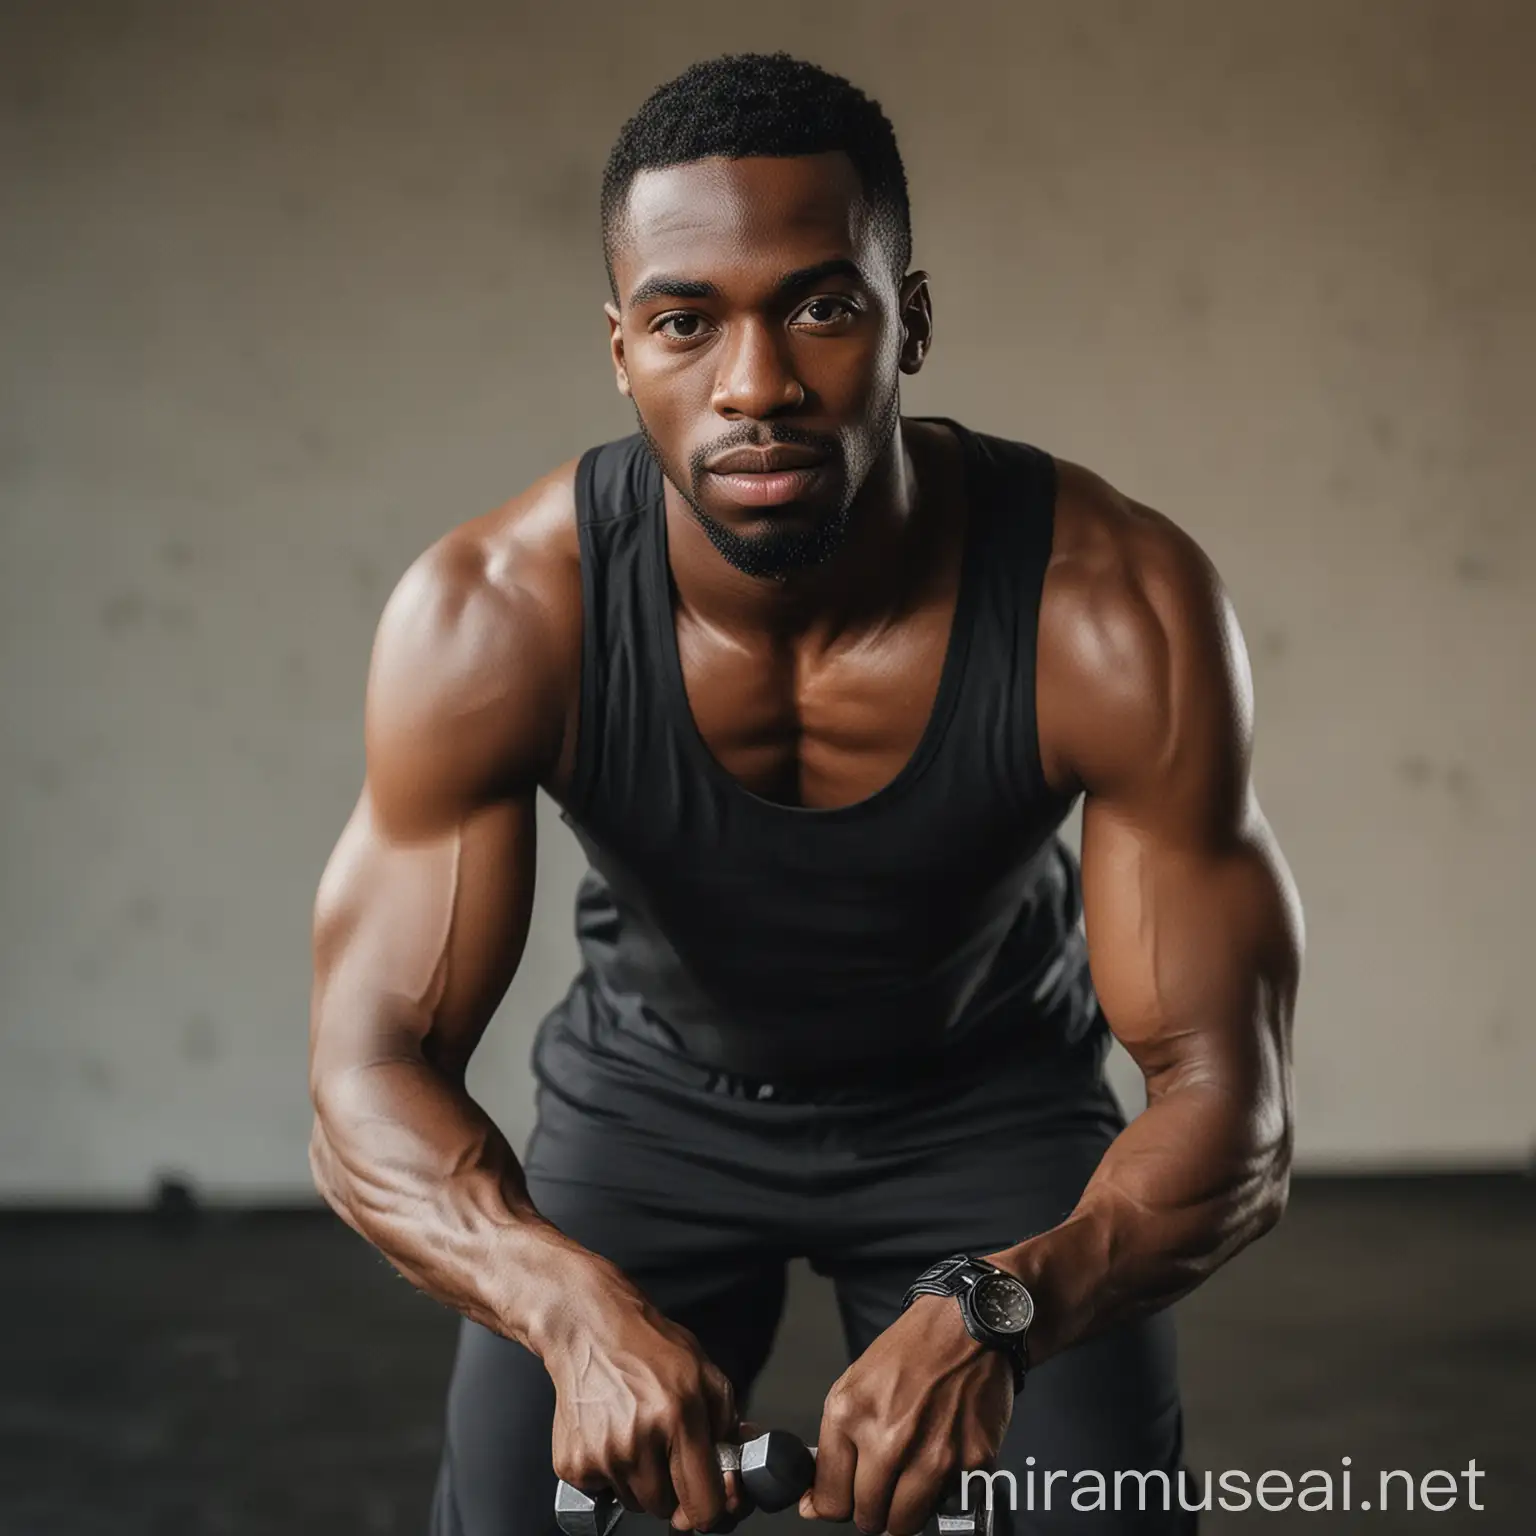 Black Man Working Out in Gym with Dumbbells and Exercise Equipment